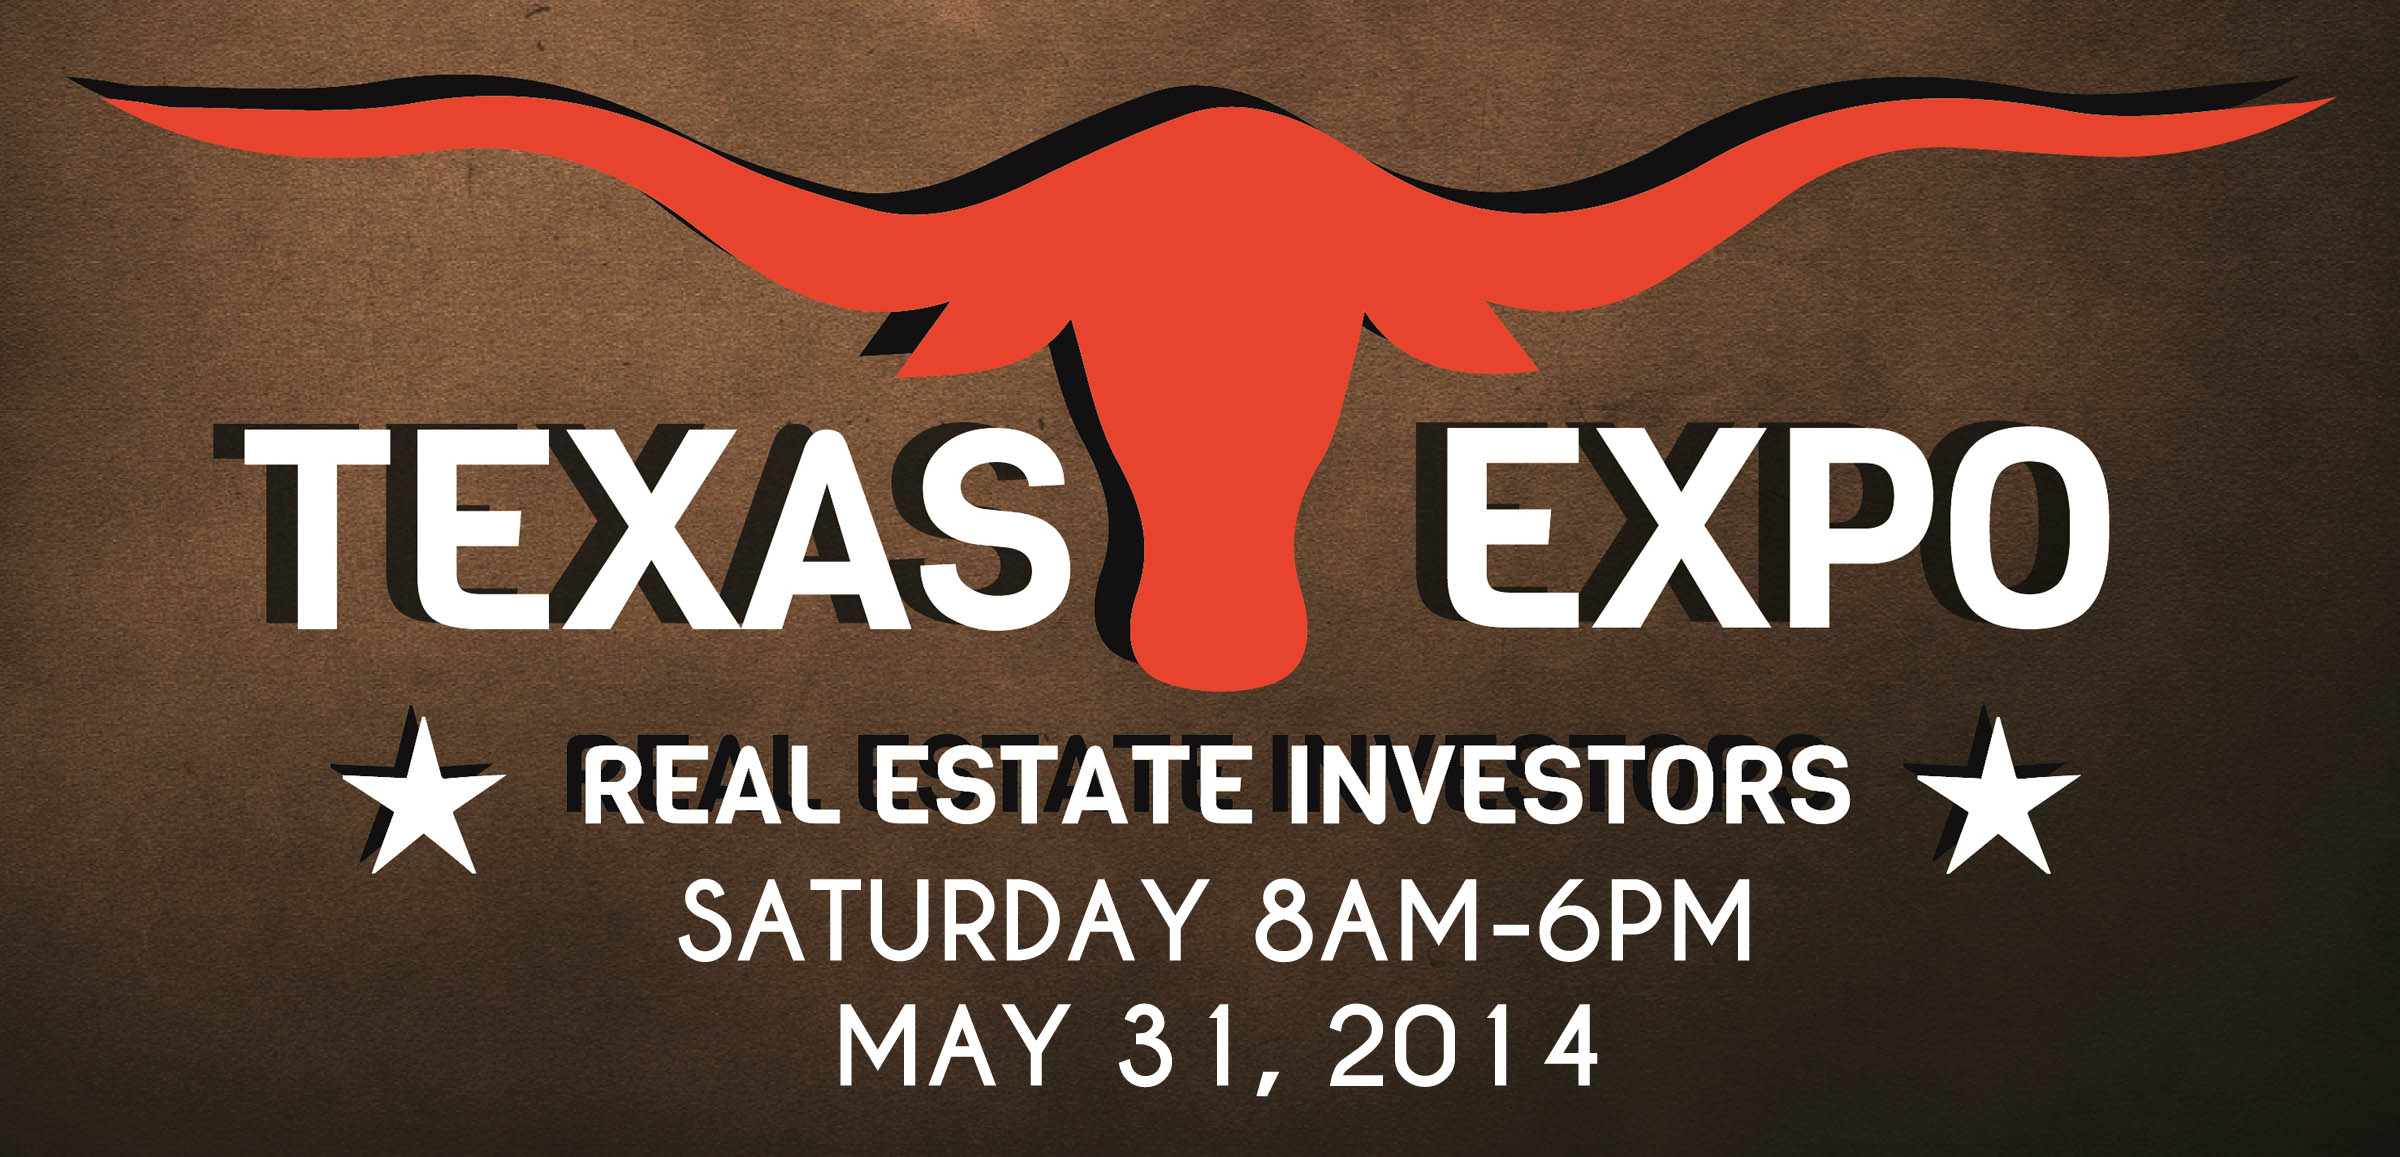 Join The Real Estate Guys at the San Antonio Texas Expo on May 31, 2014